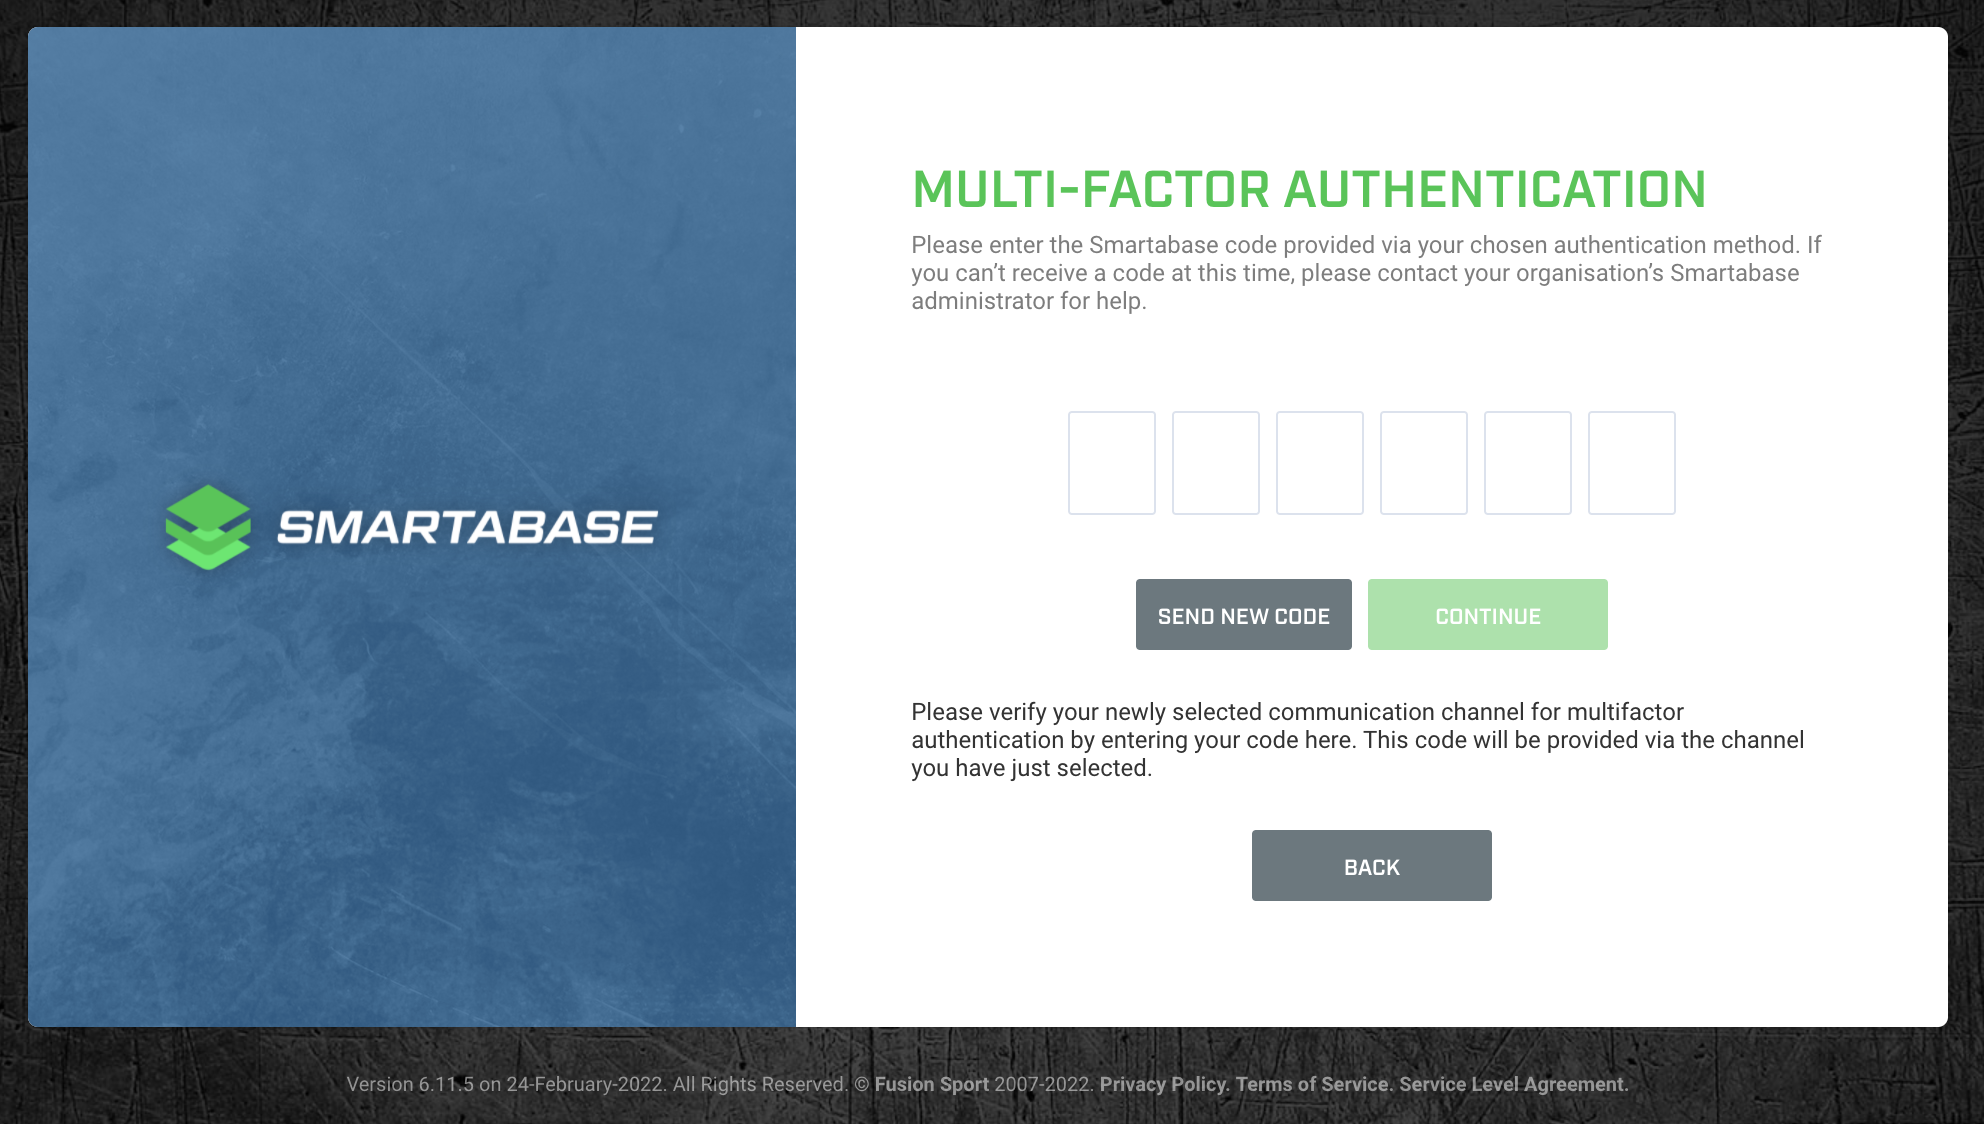 A screenshot of the multi-factor authentication methods for a Smartabase Online account.